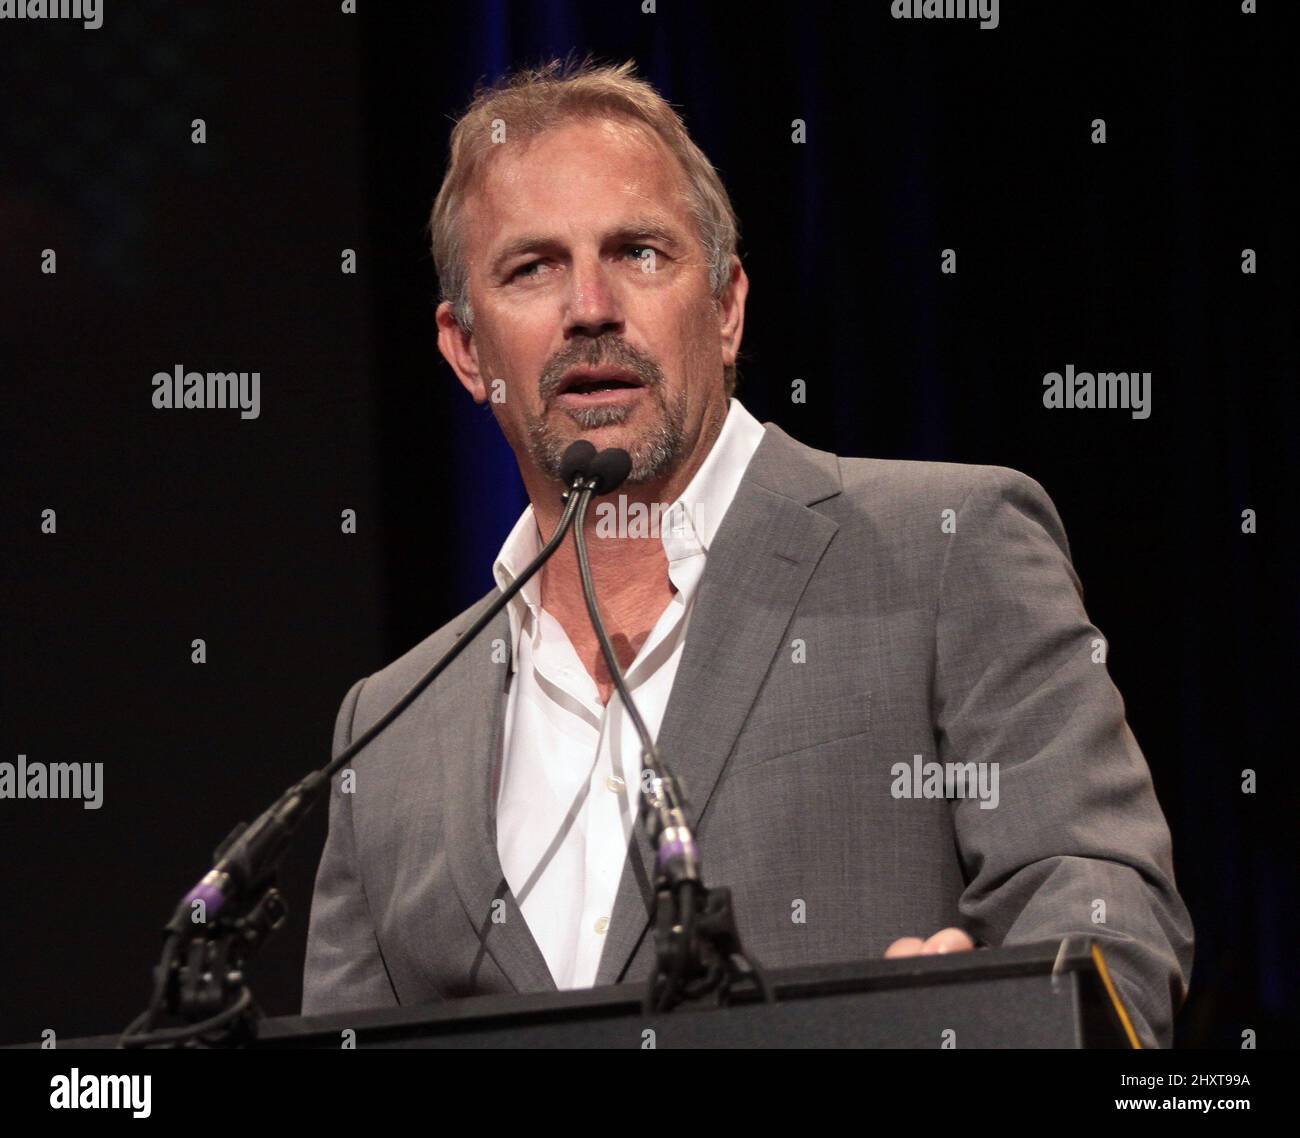 Kevin Costner attends as Annette Bening is honored with the American Riviera Award at the 2011 Santa Barbara International Film Festival held at the Arlington Theater in Santa Barbara, CA. Stock Photo